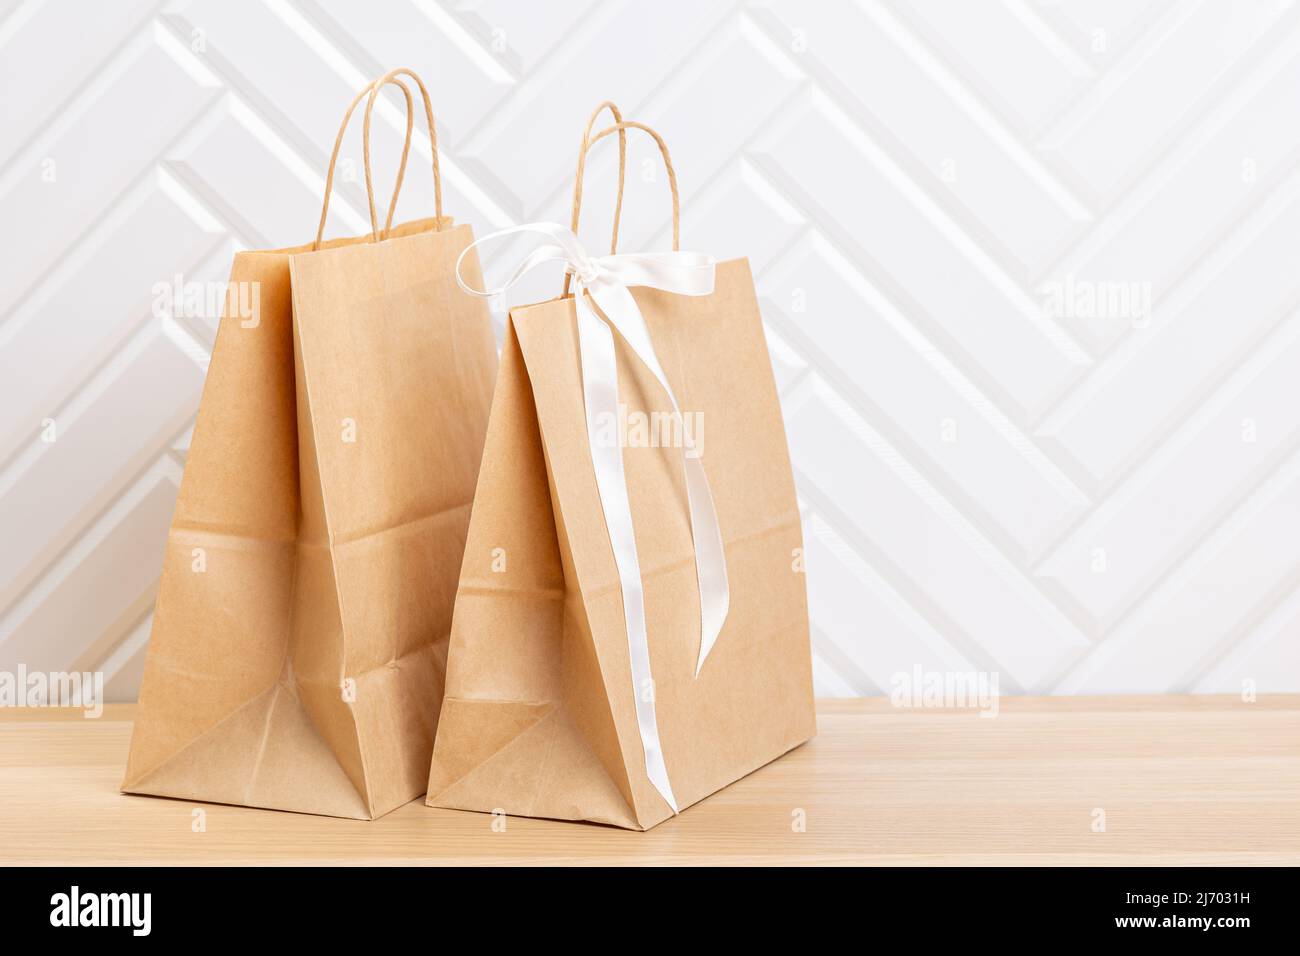 Blank  paper carrier bag with handles for shopping, facing front on right side of a wood veneer table with white wall background providing copy space Stock Photo